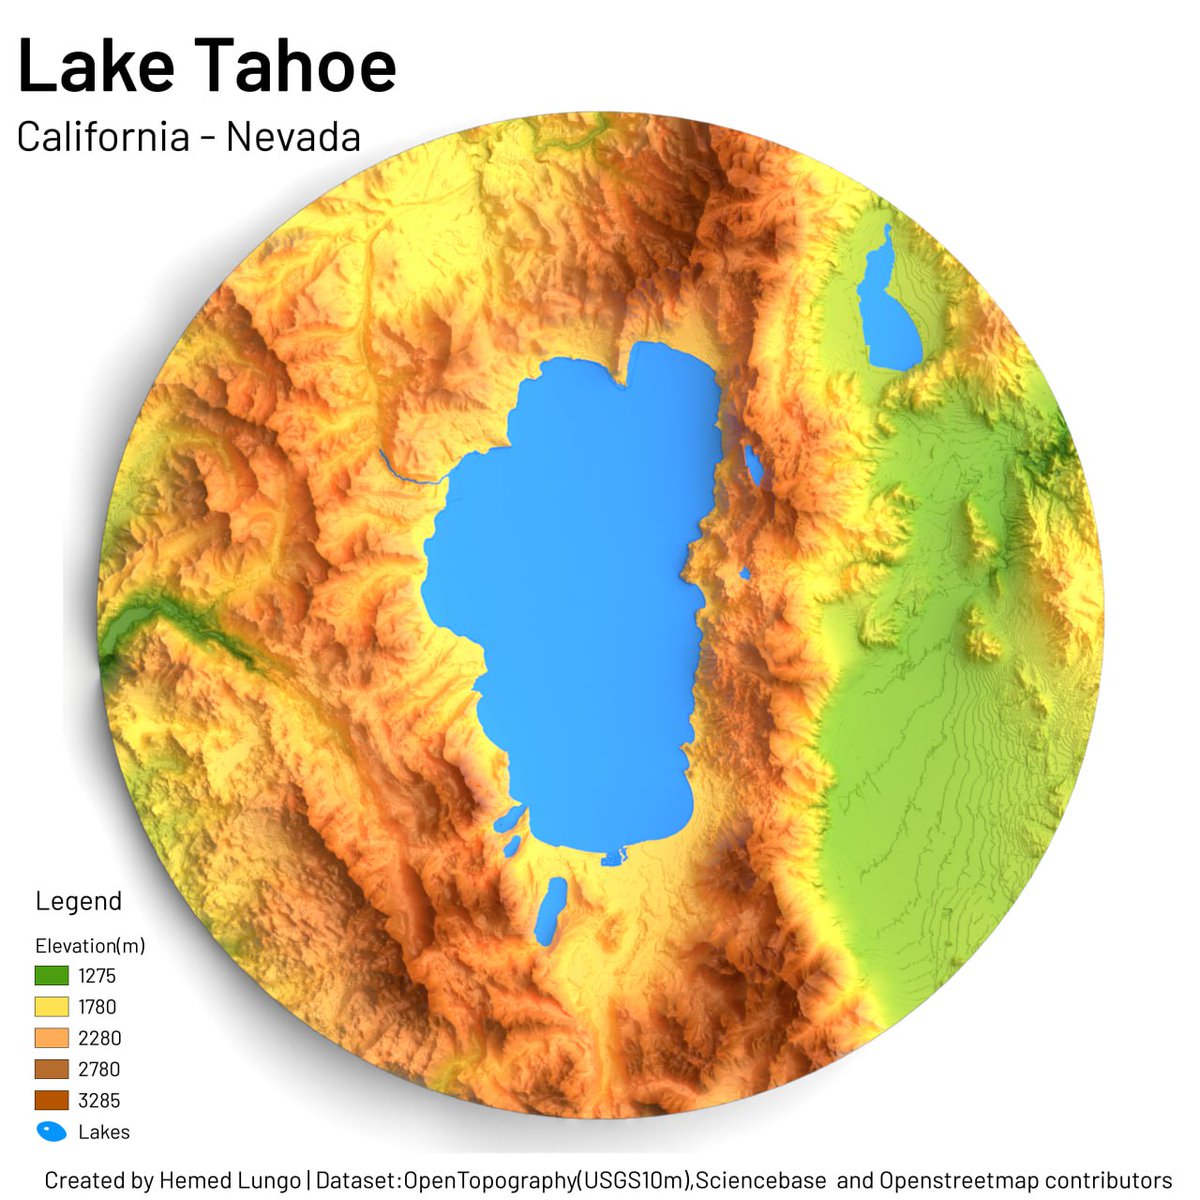 A Map🗺️showing Terrain model of Lake Tahoe, Nevada -California 🇺🇸 dataset is from USGS10m from @OpenTopography(Terrain Version) #LakeTahoe #nevada #California #USA #QGIS #b3d #GIS #gischat #cartography #geospatial #dataviz #Map